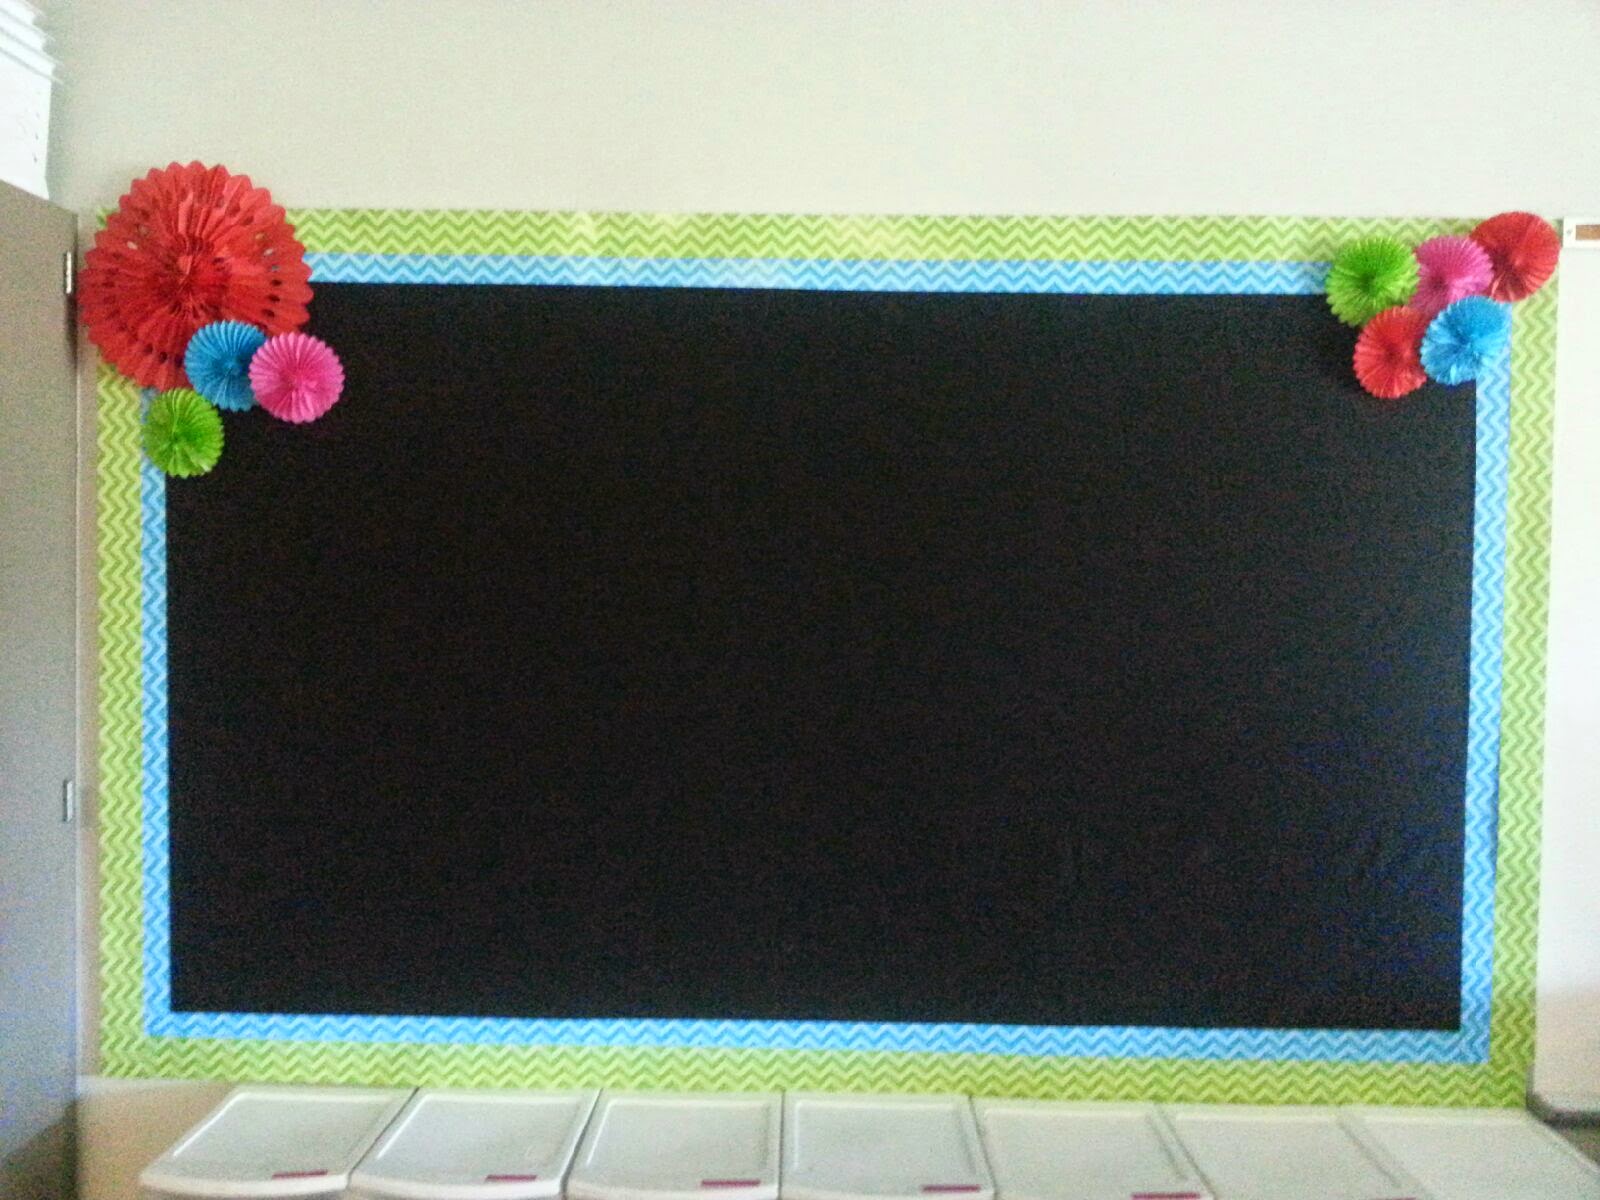 Bulletin Boards {Tips and Tricks}